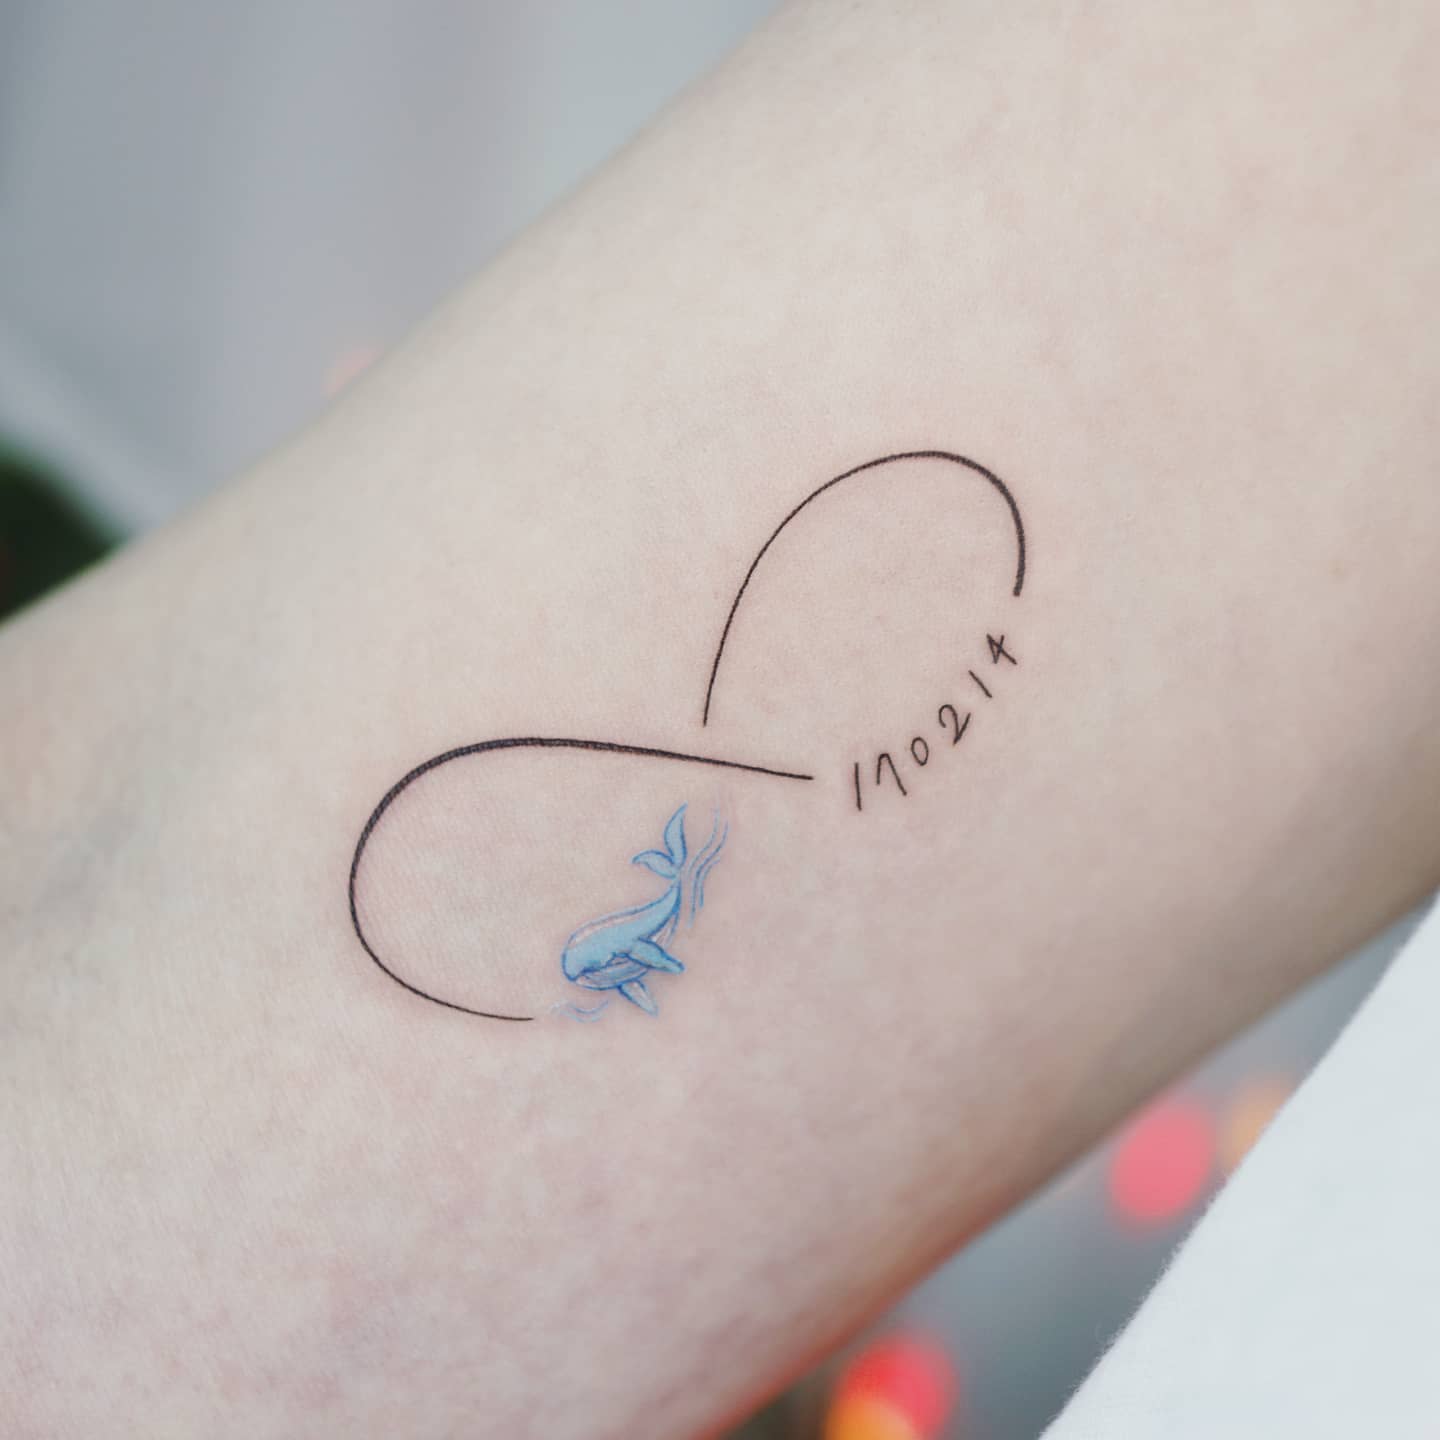 Monink tattoos - A mother's love for her daughter is always something  beyond special. Brenda Simiana has really enjoyed creating this delicate  piece, and she is mostly happy with the client's satisfaction.